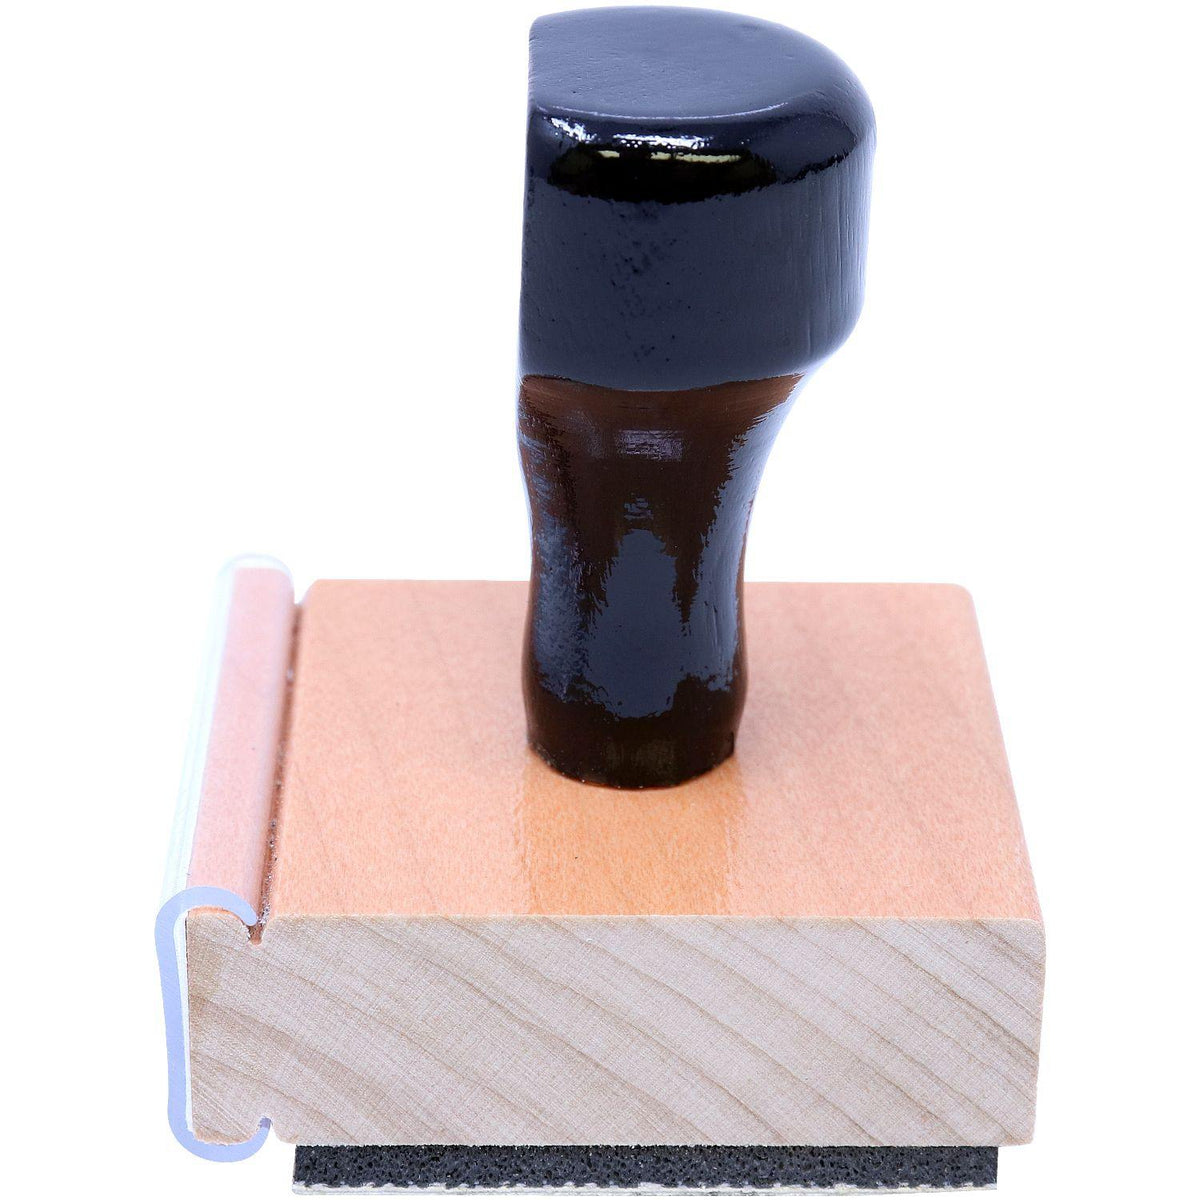 Architect Regular Rubber Stamp of Seal - Engineer Seal Stamps